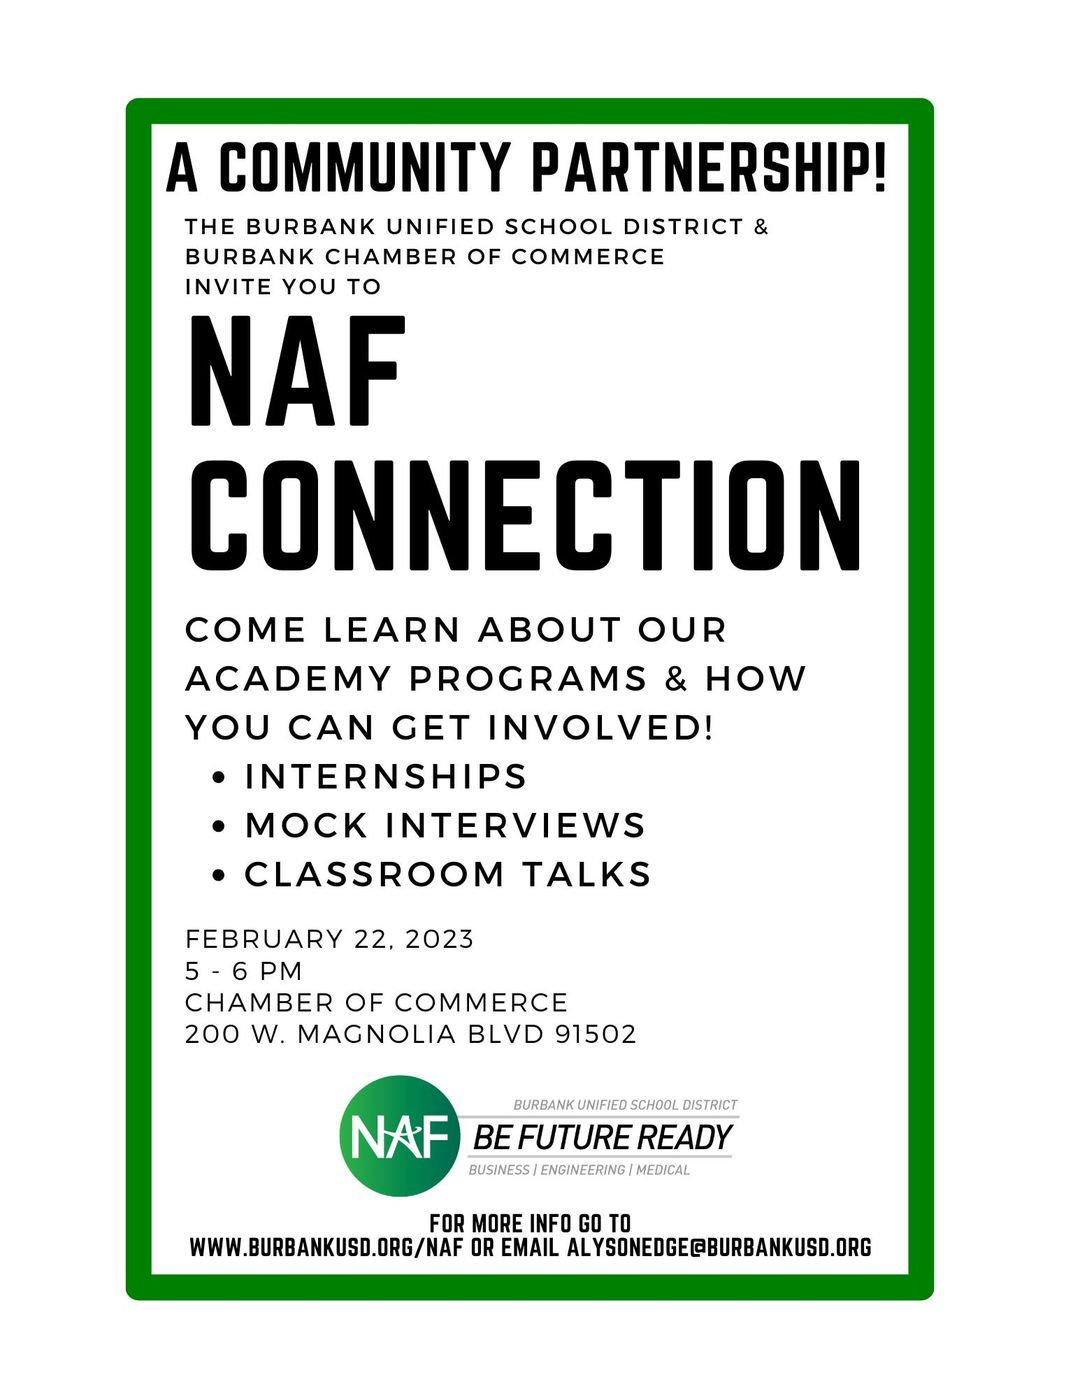 May be an image of text that says 'A COMMUNITY PARTNERSHIP! THE BURBANK UNIFIED SCHOOL DISTRICT & BURBANK CHAMBER OF COMMERCE INVITE YOU TO NAF CONNECTION COME LEARN ABOUT OUR ACADEMY PROGRAMS & HOW YOU CAN GET INVOLVED! INTERNSHIPS •MOCK INTERVIEWS CLASSROOM TALKS FEBRUARY 22, 2023 -6PM PM CHAMBER OF COMMERCE 200 W. MAGNOLIA BLVD 91502 BURBANK UNIFIED SCHOOL DISTRICT NAF BEFUTURE READY BUSINESS/ ENGINEERING MEDICAL FOR MORE INFO GO TO WWW.BURBANKUSD.ORG/NAF OR EMAIL ALY'